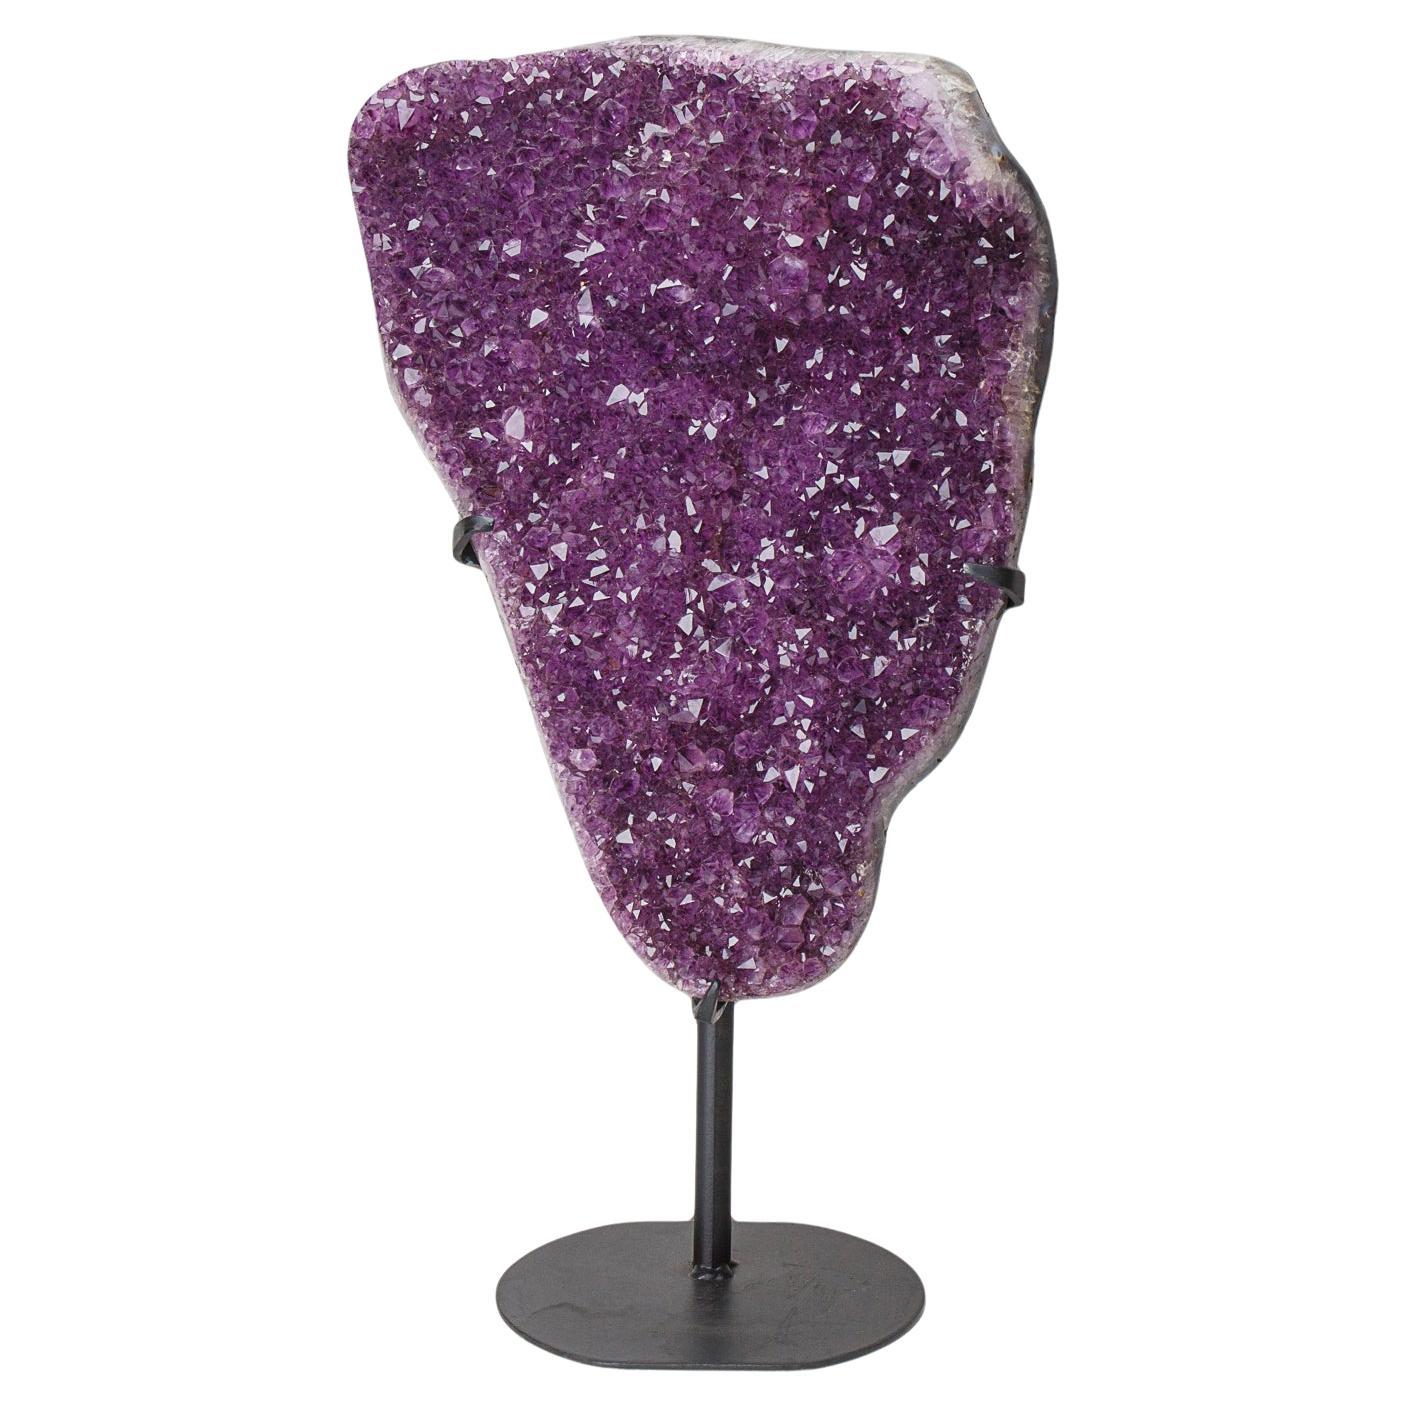 Genuine Amethyst Crystal Cluster on Stand from Brazil (32.5 lbs)